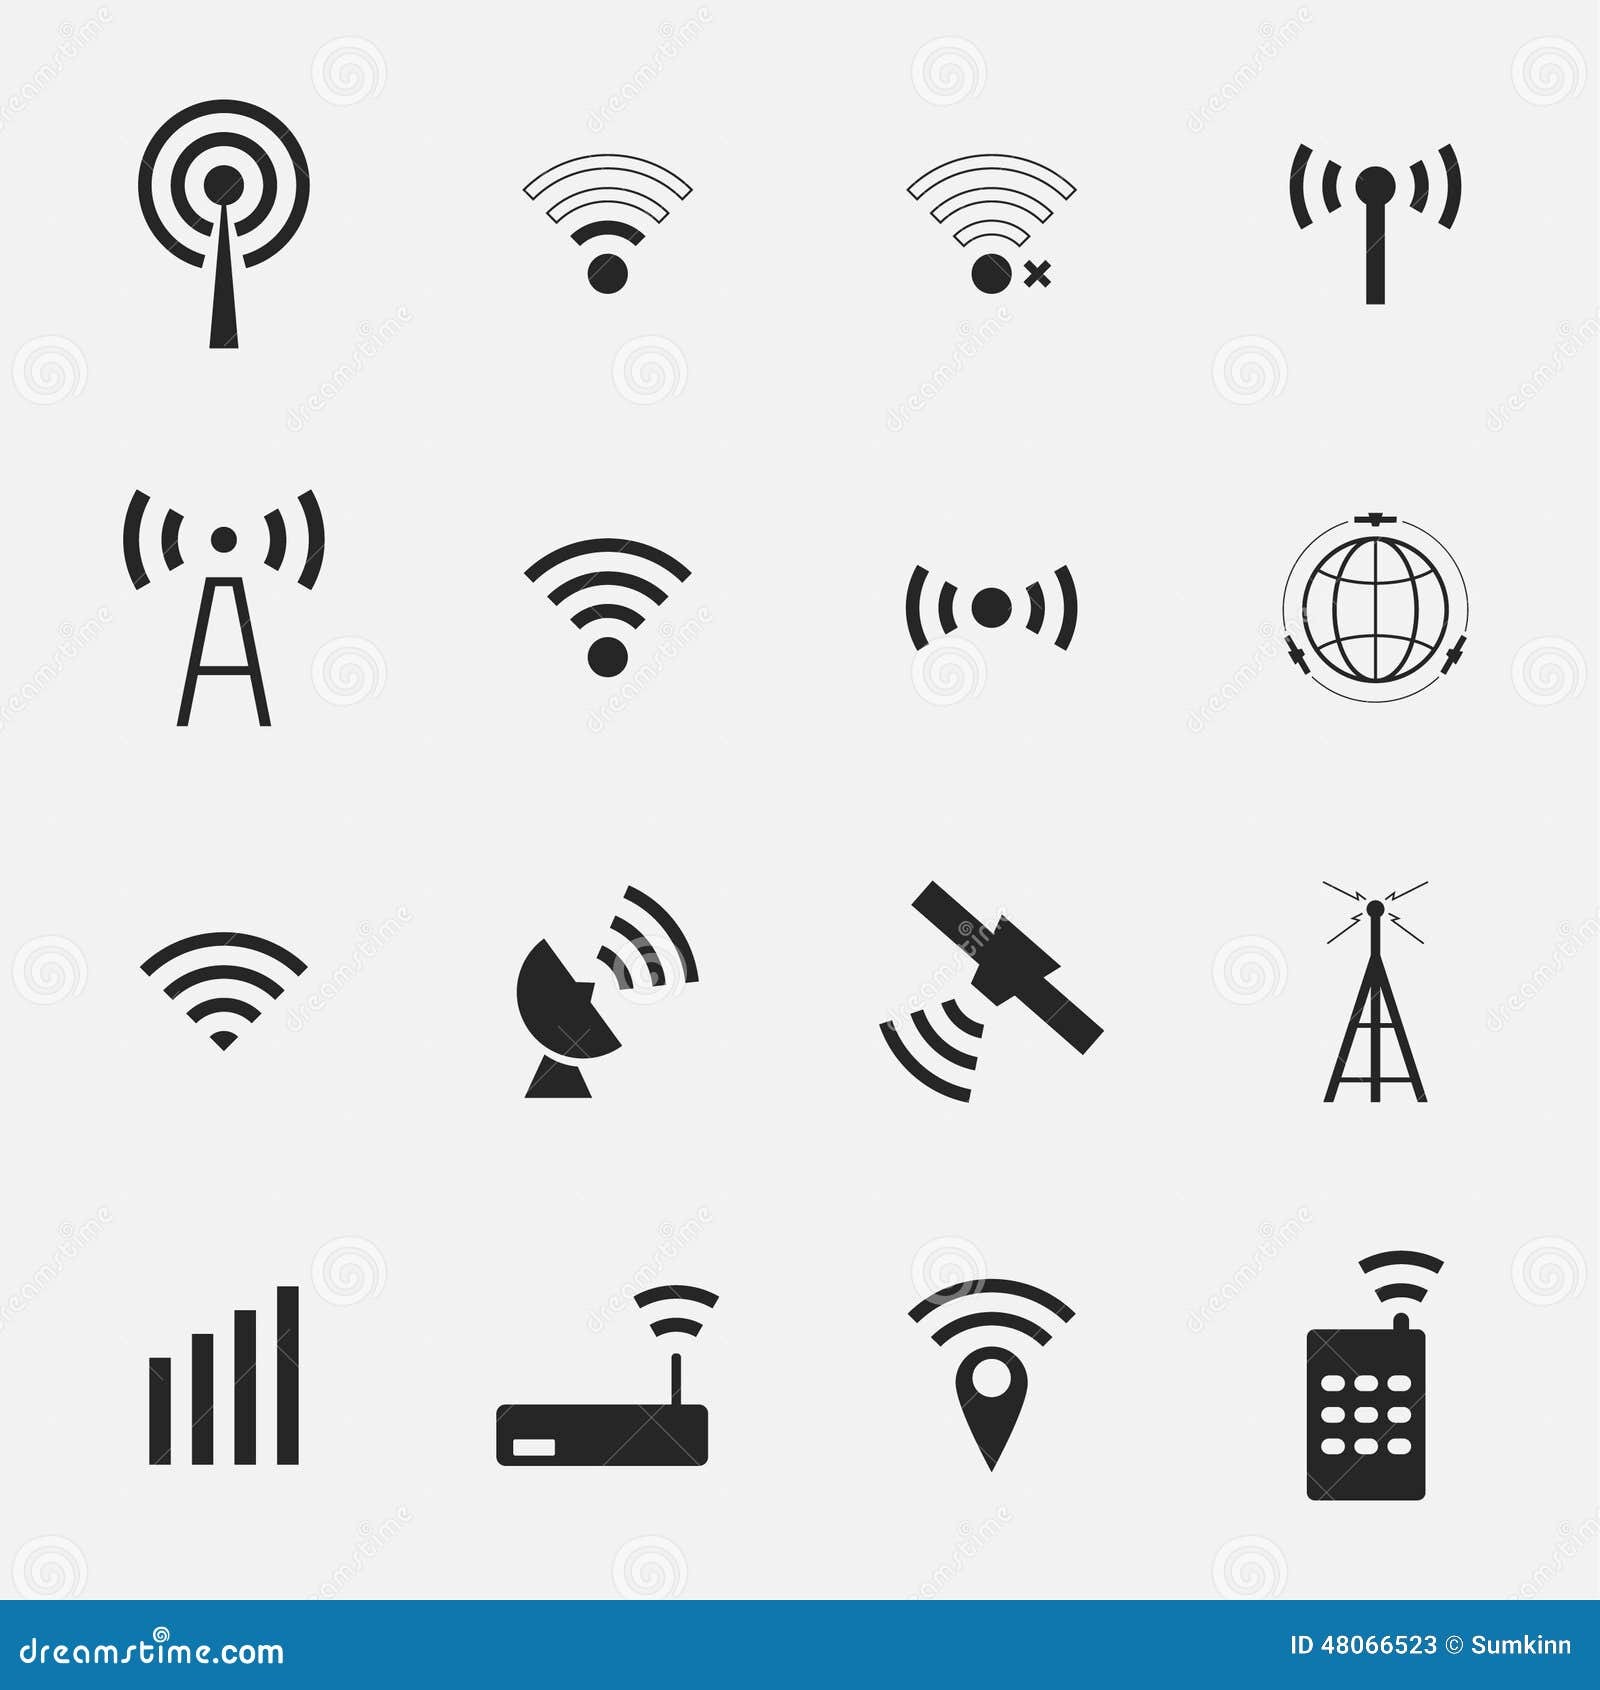 Set Of Vector Wi-Fi And Wireless Icons For Remote Access And ...